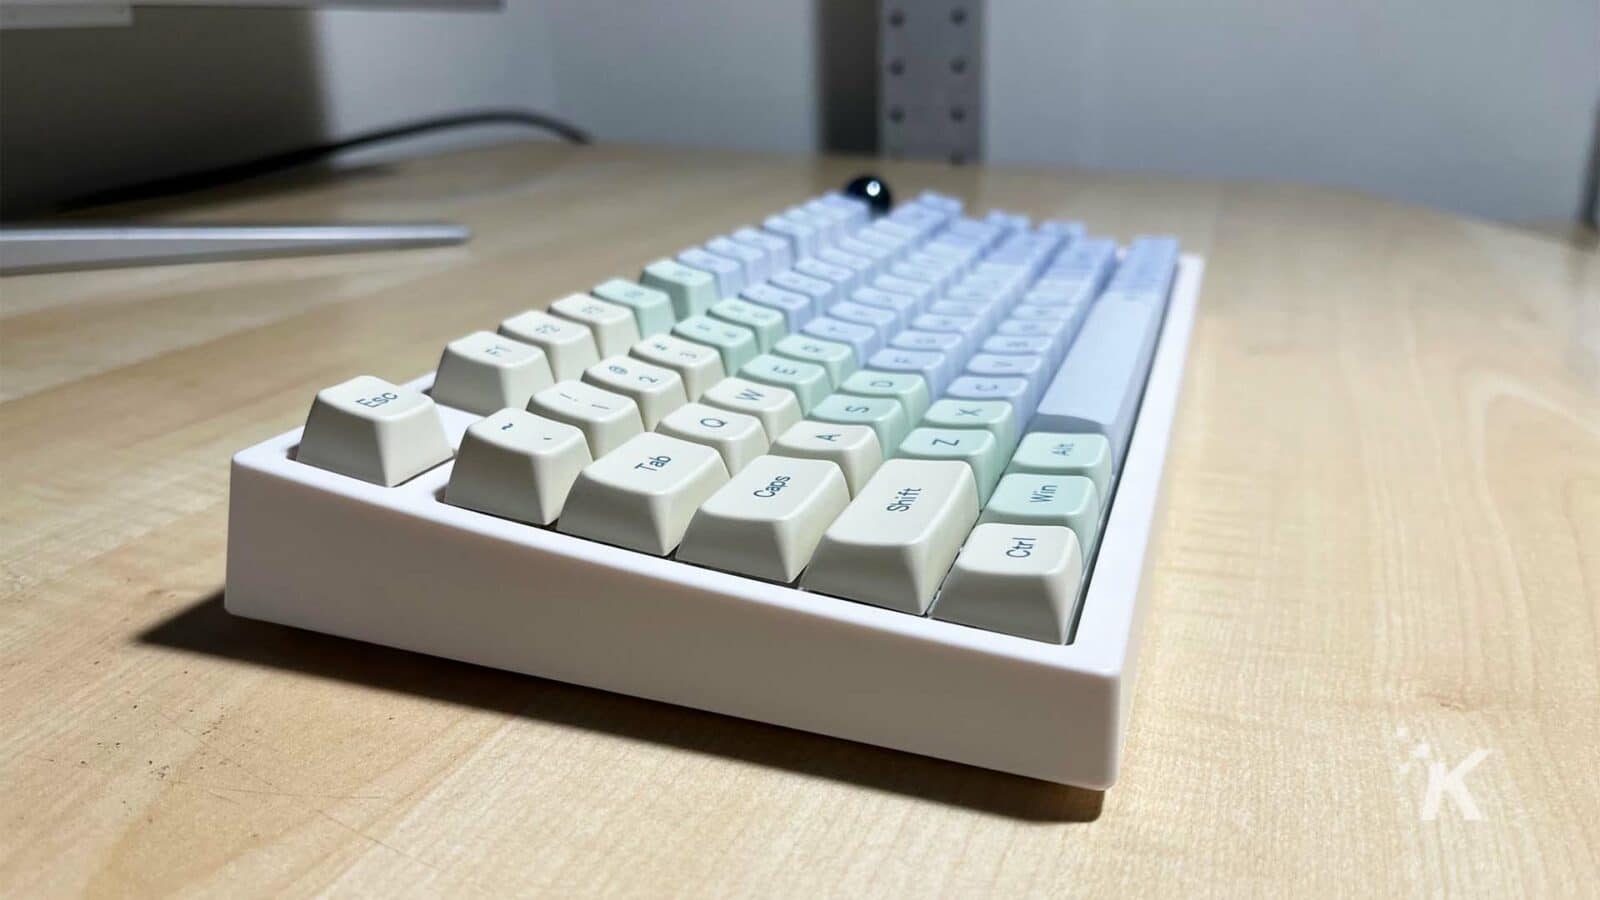 EPOMAKER TH80 PRO keyboard from the left side